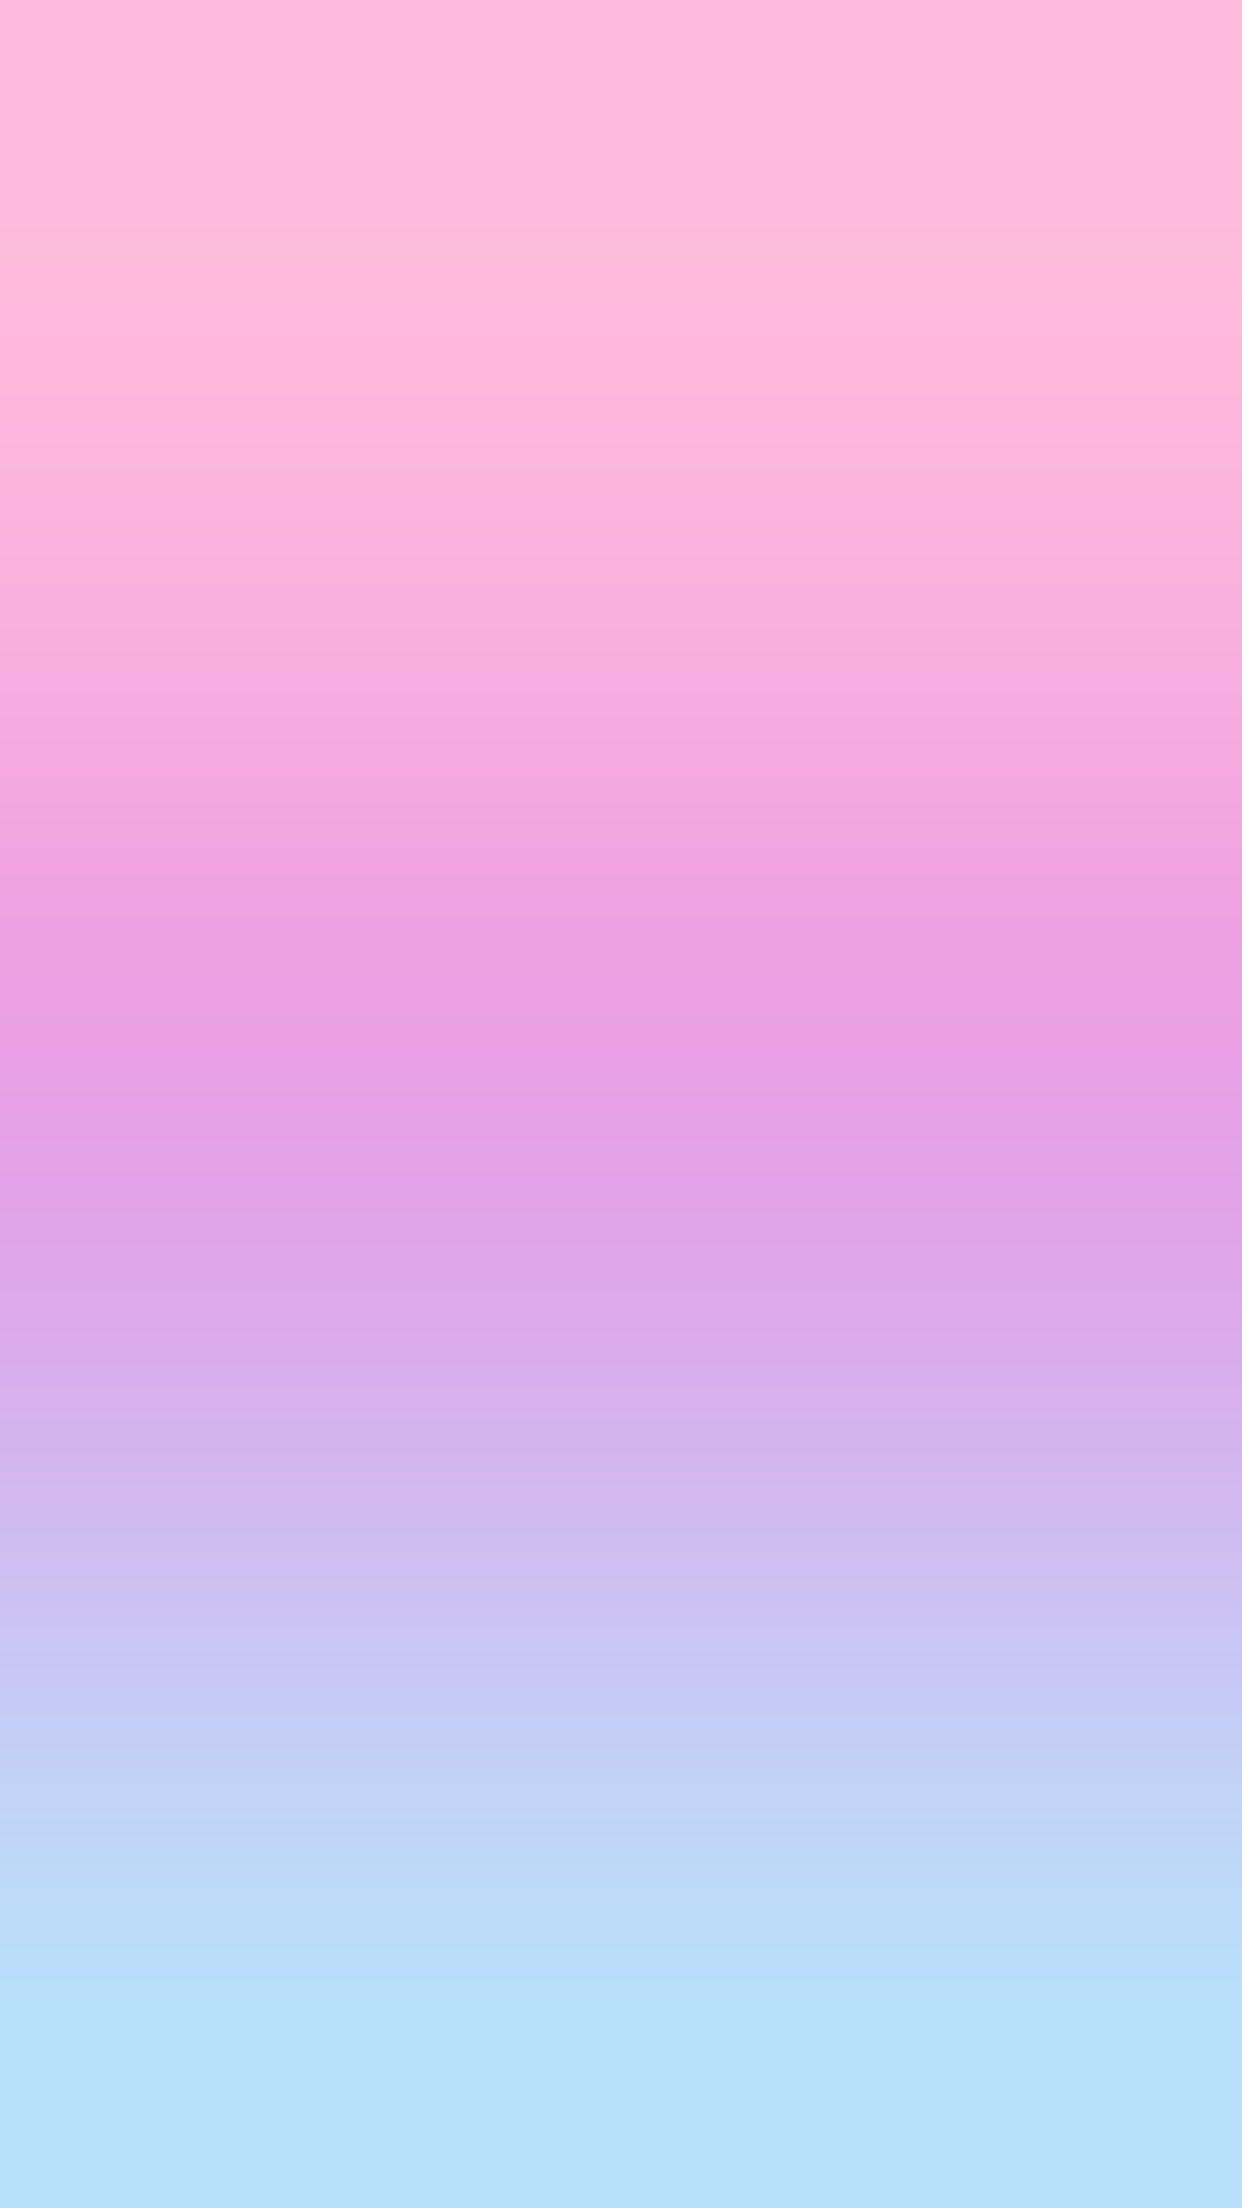 Pastel Blue and Pink Wallpaper Free Pastel Blue and Pink